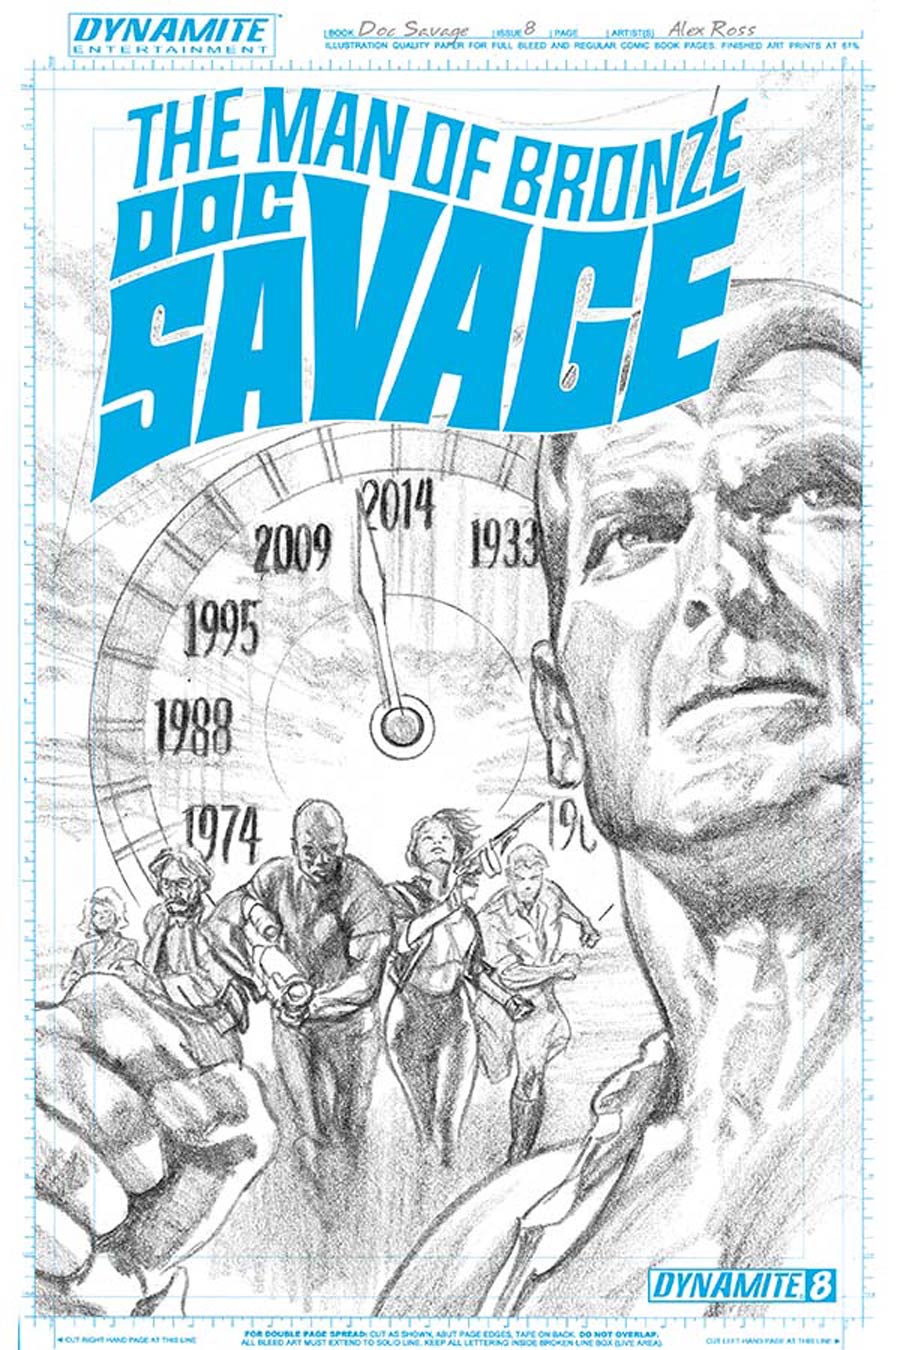 Doc Savage Vol 5 #8 Cover E High-End Alex Ross Art Board Ultra-Limited Variant Cover (ONLY 25 COPIES IN EXISTENCE!)